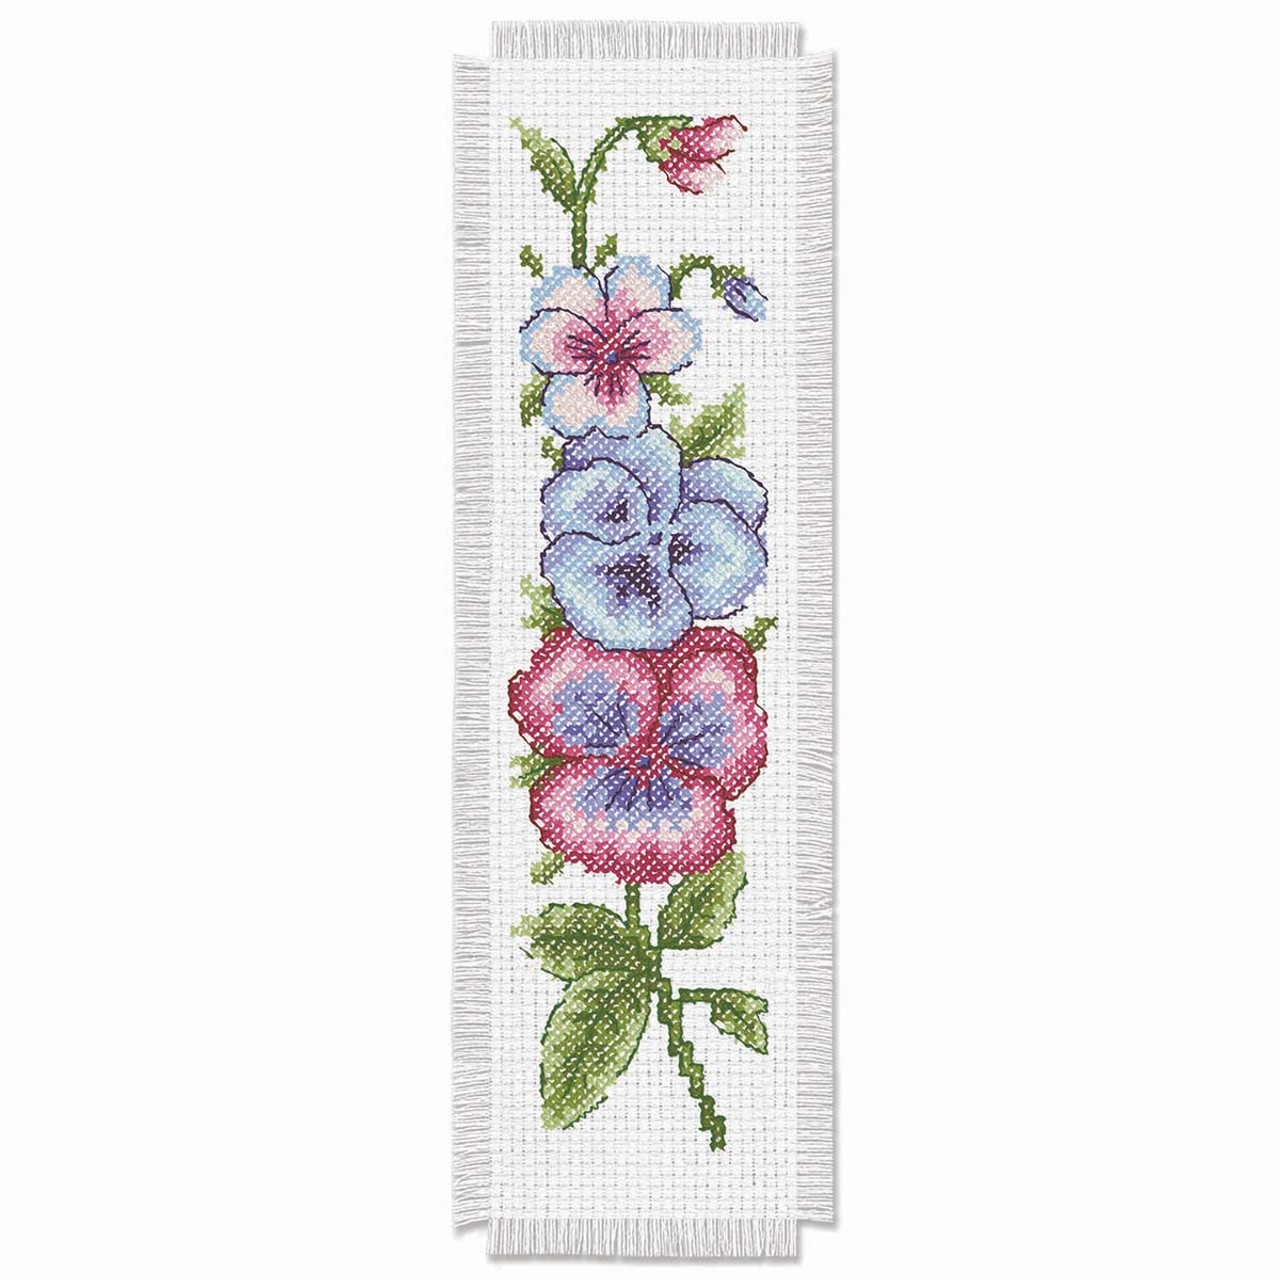 CROSS STITCH BOOK-Hardcover/Softcover-YOUR CHOICE-Floral,Celtic